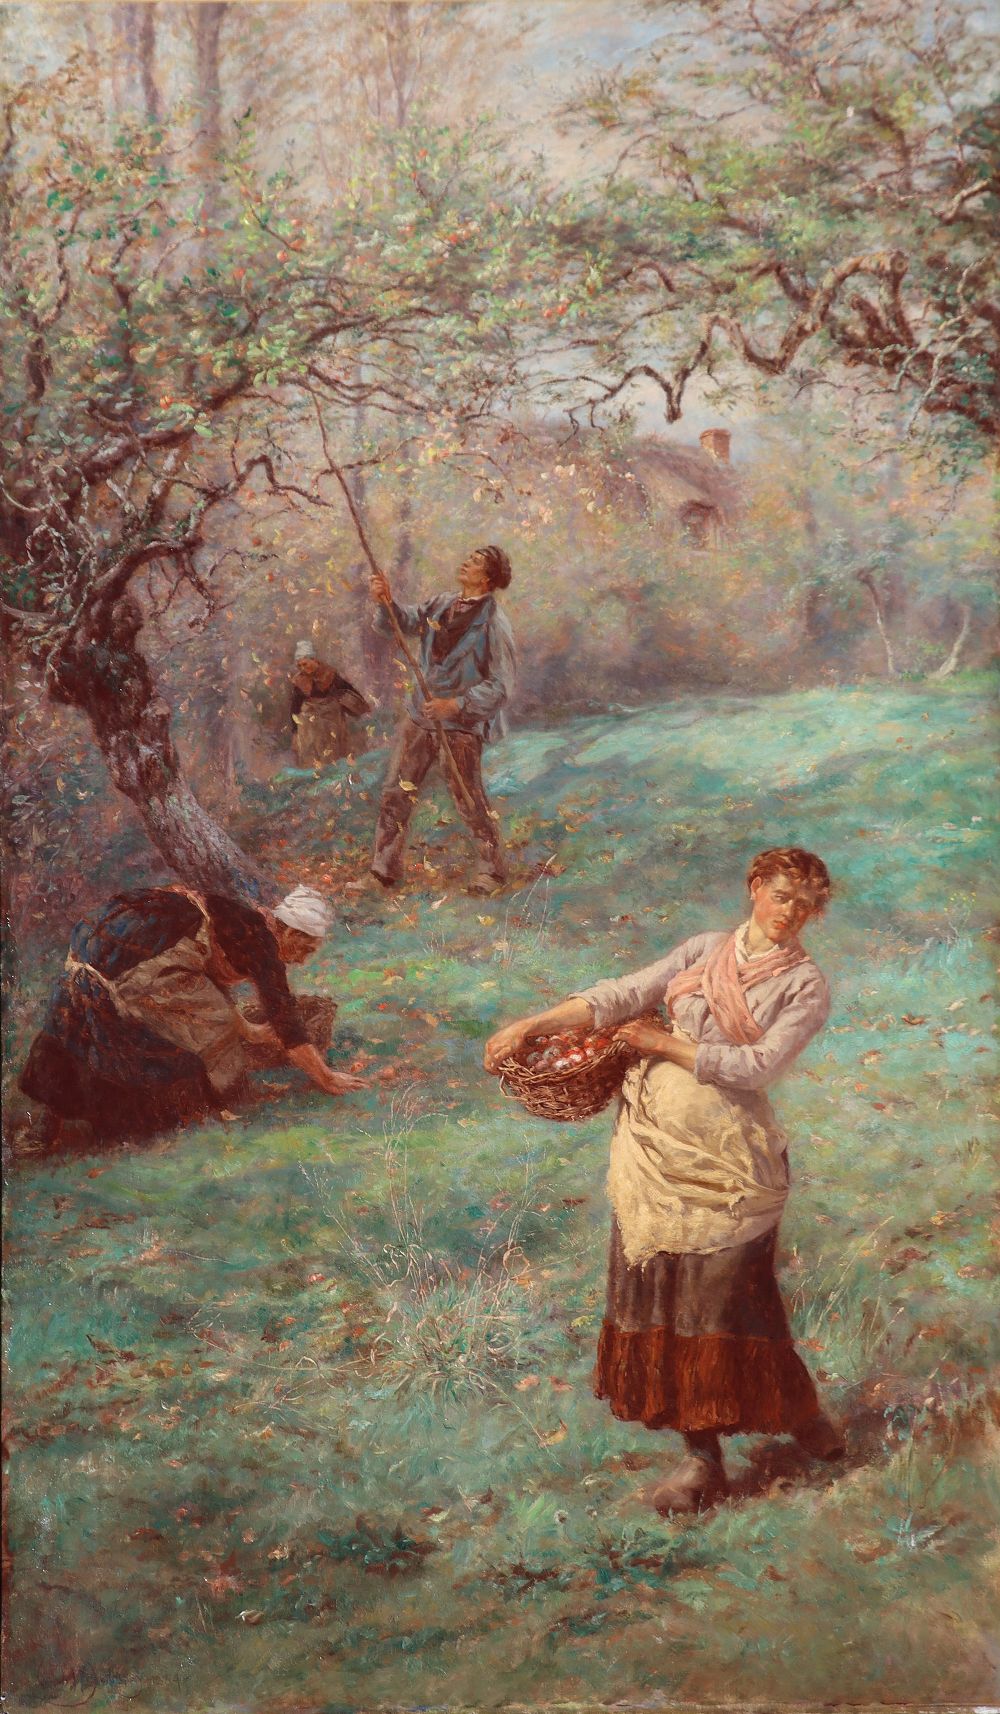 Lot 30 - GATHERING APPLES, NORMANDY by William John Hennessy